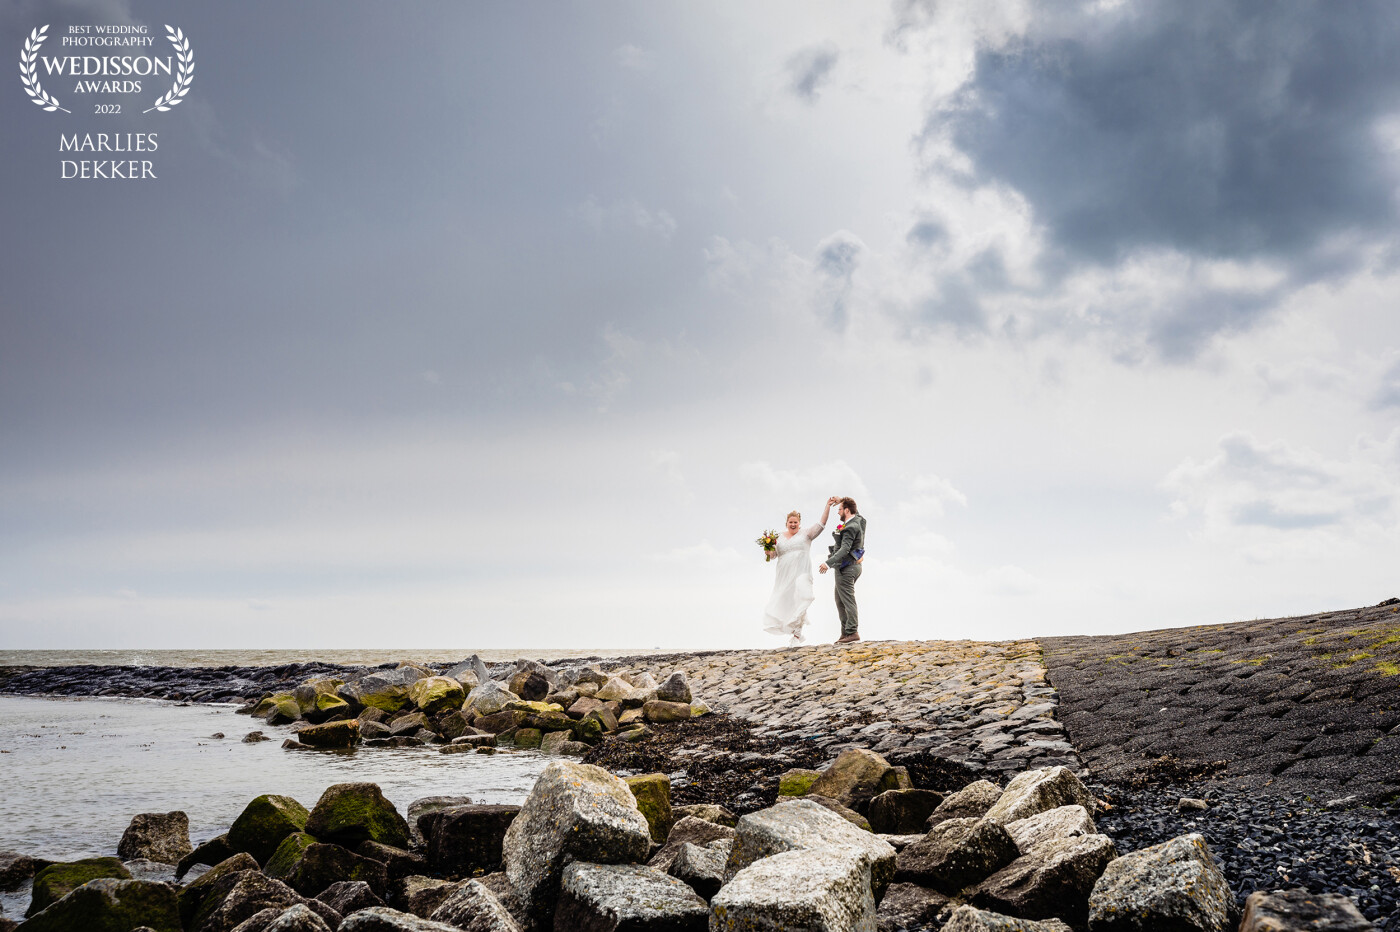 A wedding on Terschelling. My favorite Dutch island, where i am on regular basis. On the south part the island is protected with a dike where we went for this photo. The clouds make it an atmospheric and complete composition. <br />
The couple has this photo in their livingroom now in big format above their lounge suite. So lovely! A bigger compliment you can not get as a photographer i guess.